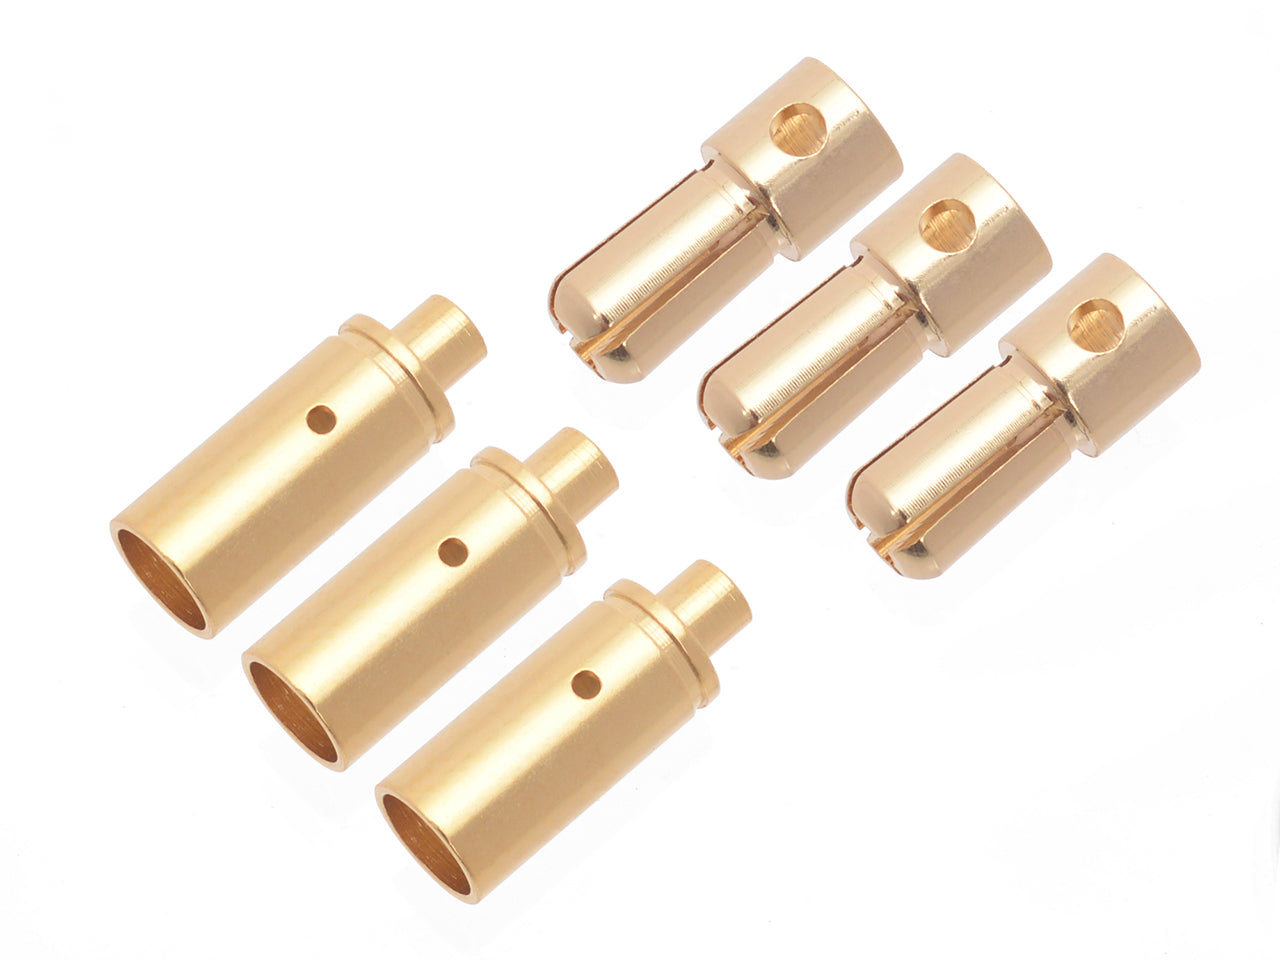 GA057 3.5mm connector set (3 male and female each)